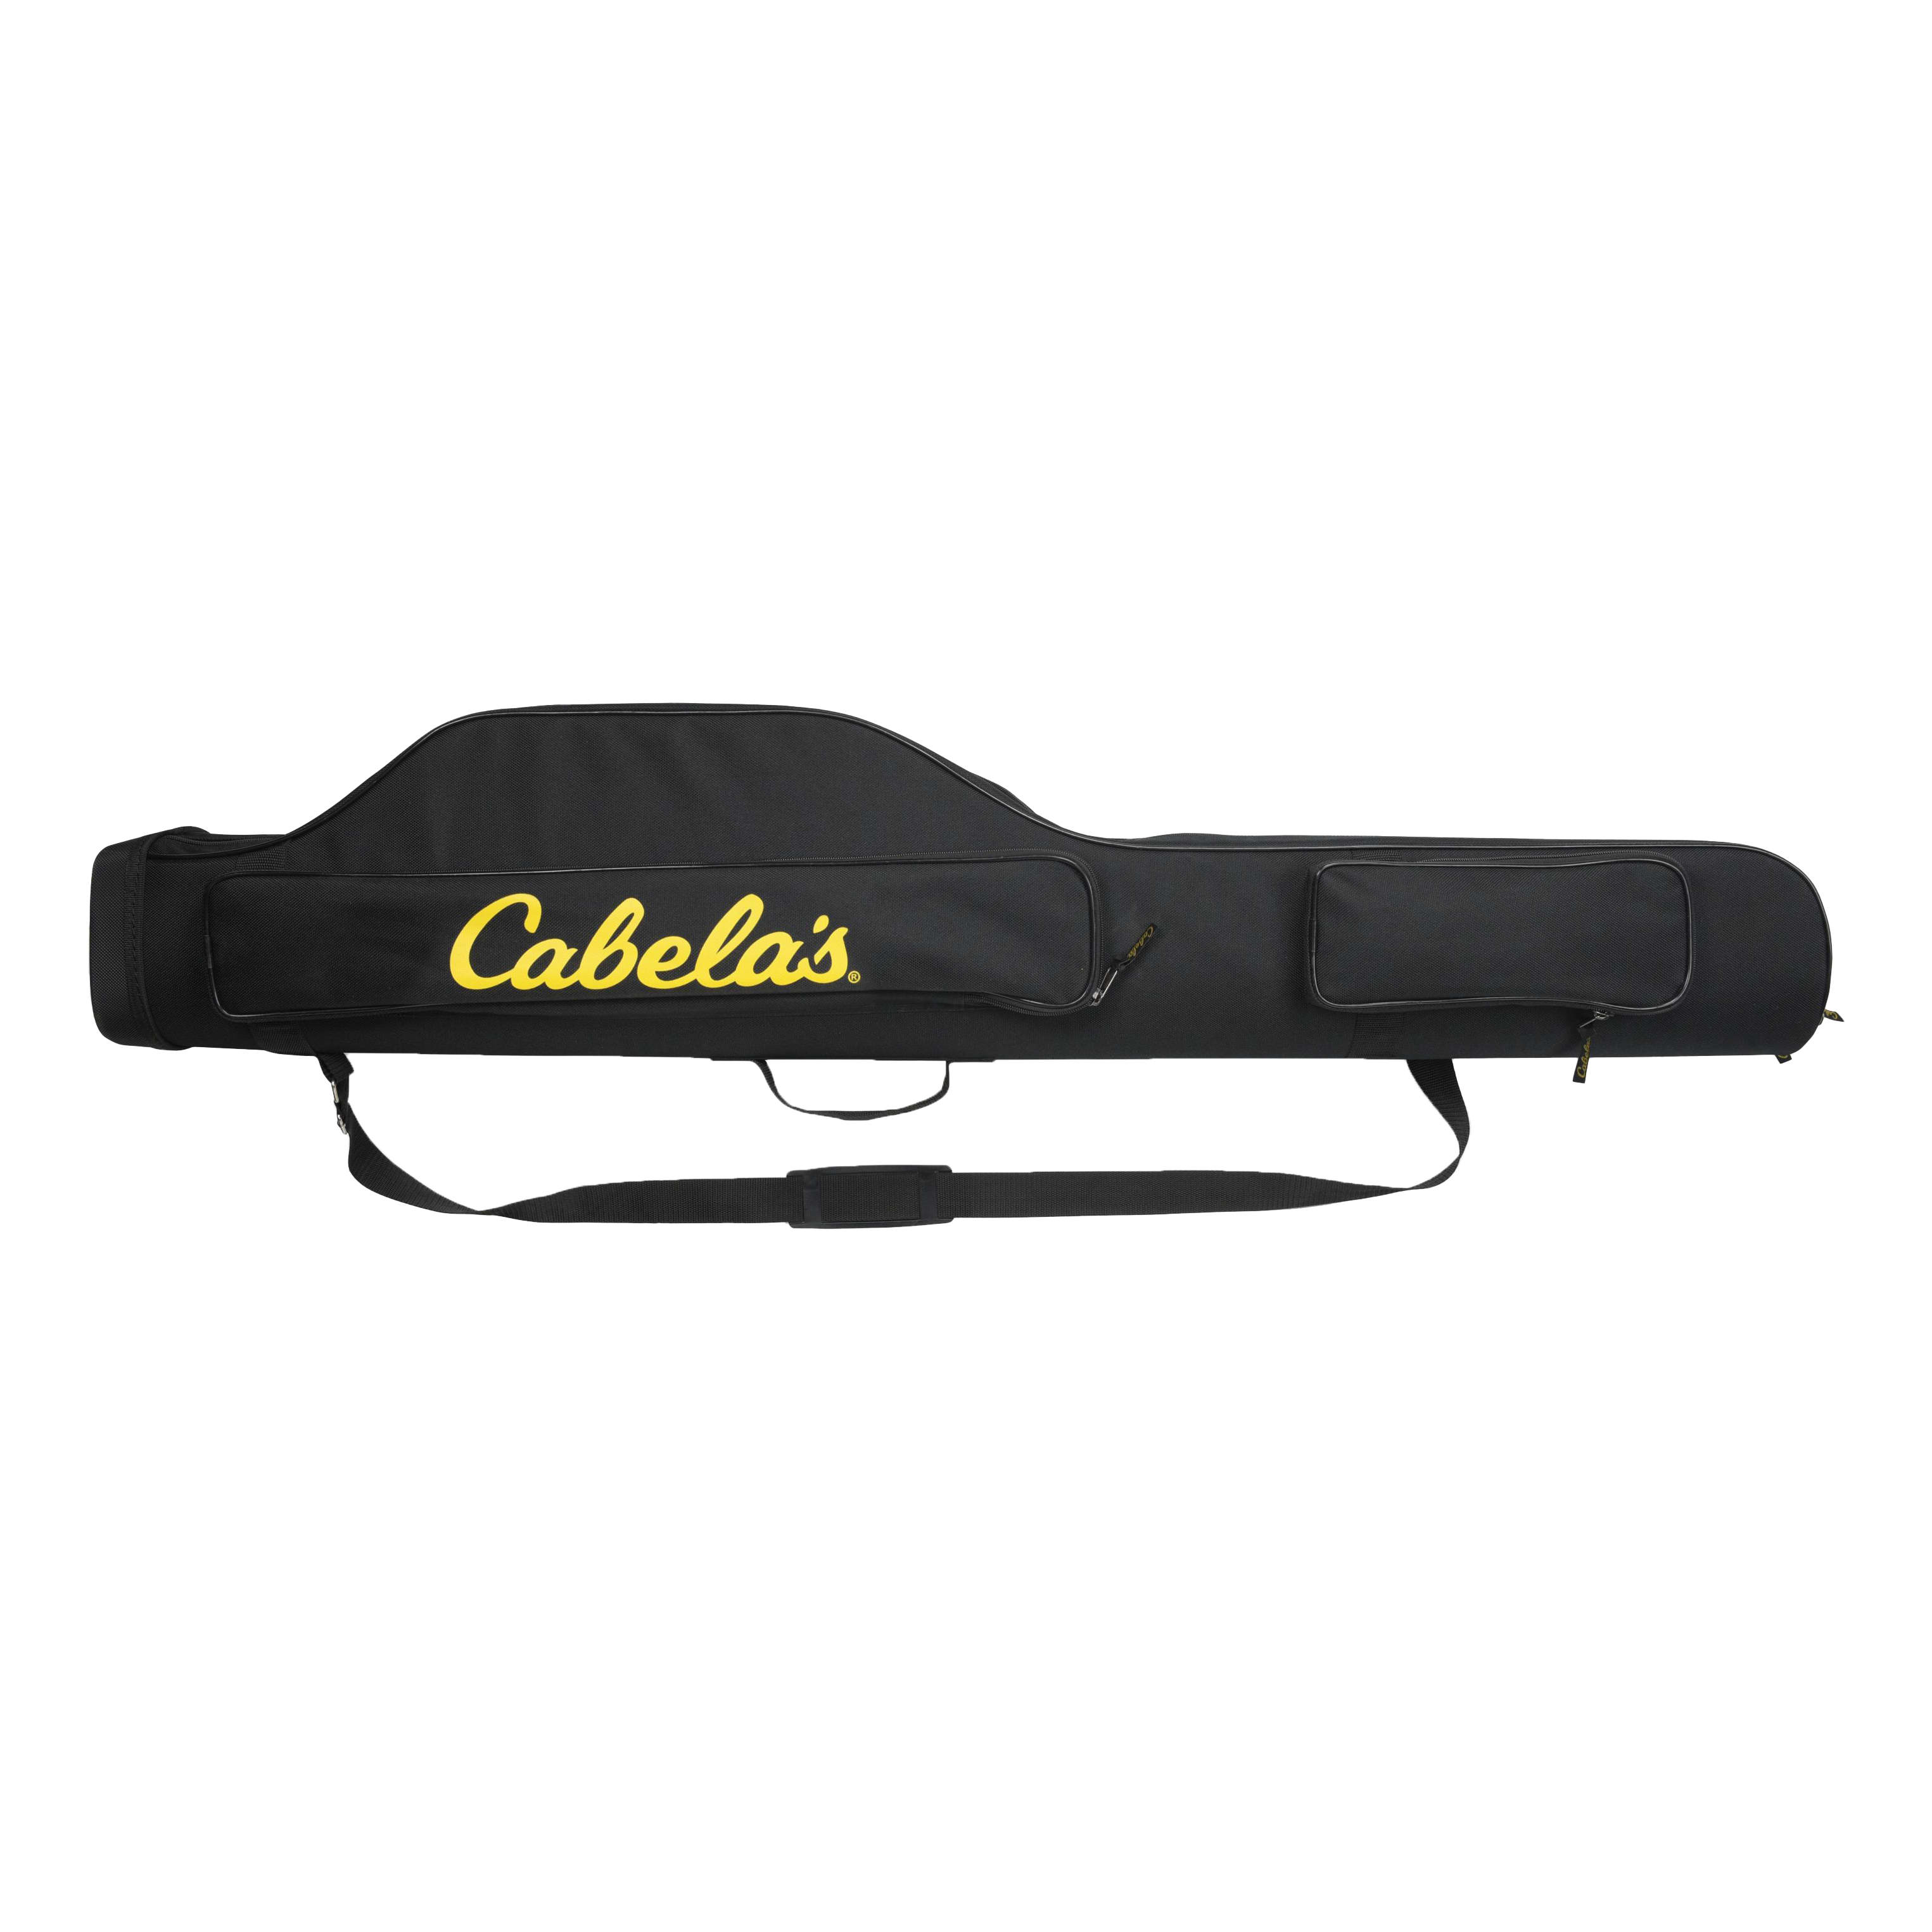 Fishing Rod Cases: Best Travel Fishing Rod Protective Tubes